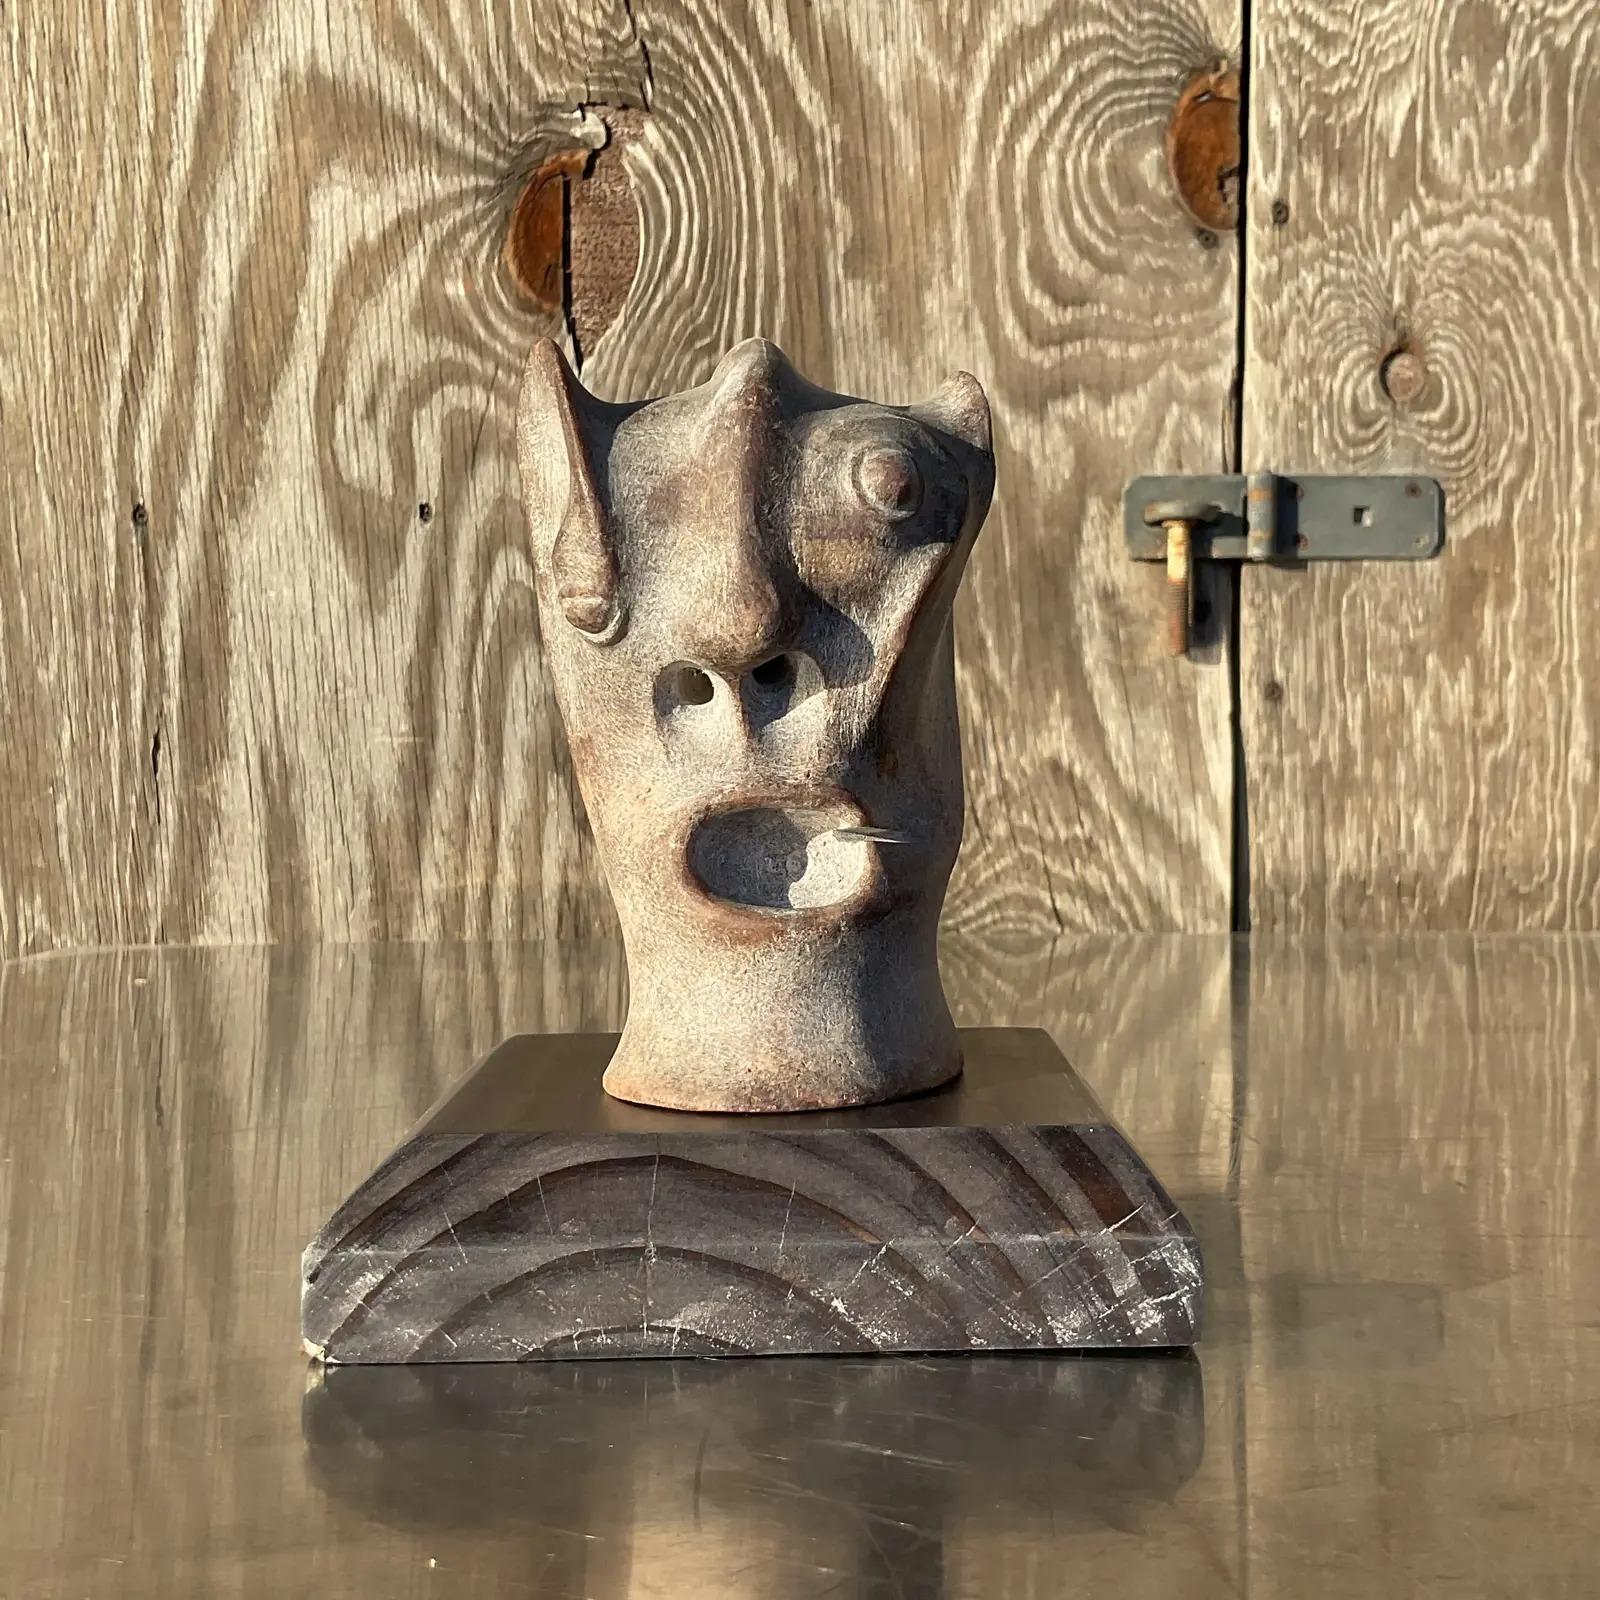 A fantastic vintage Boho Sculpture. A chic little carved stone of an Abstract head. Rest of a wooden plinth. Acquired from a Palm Beach estate.